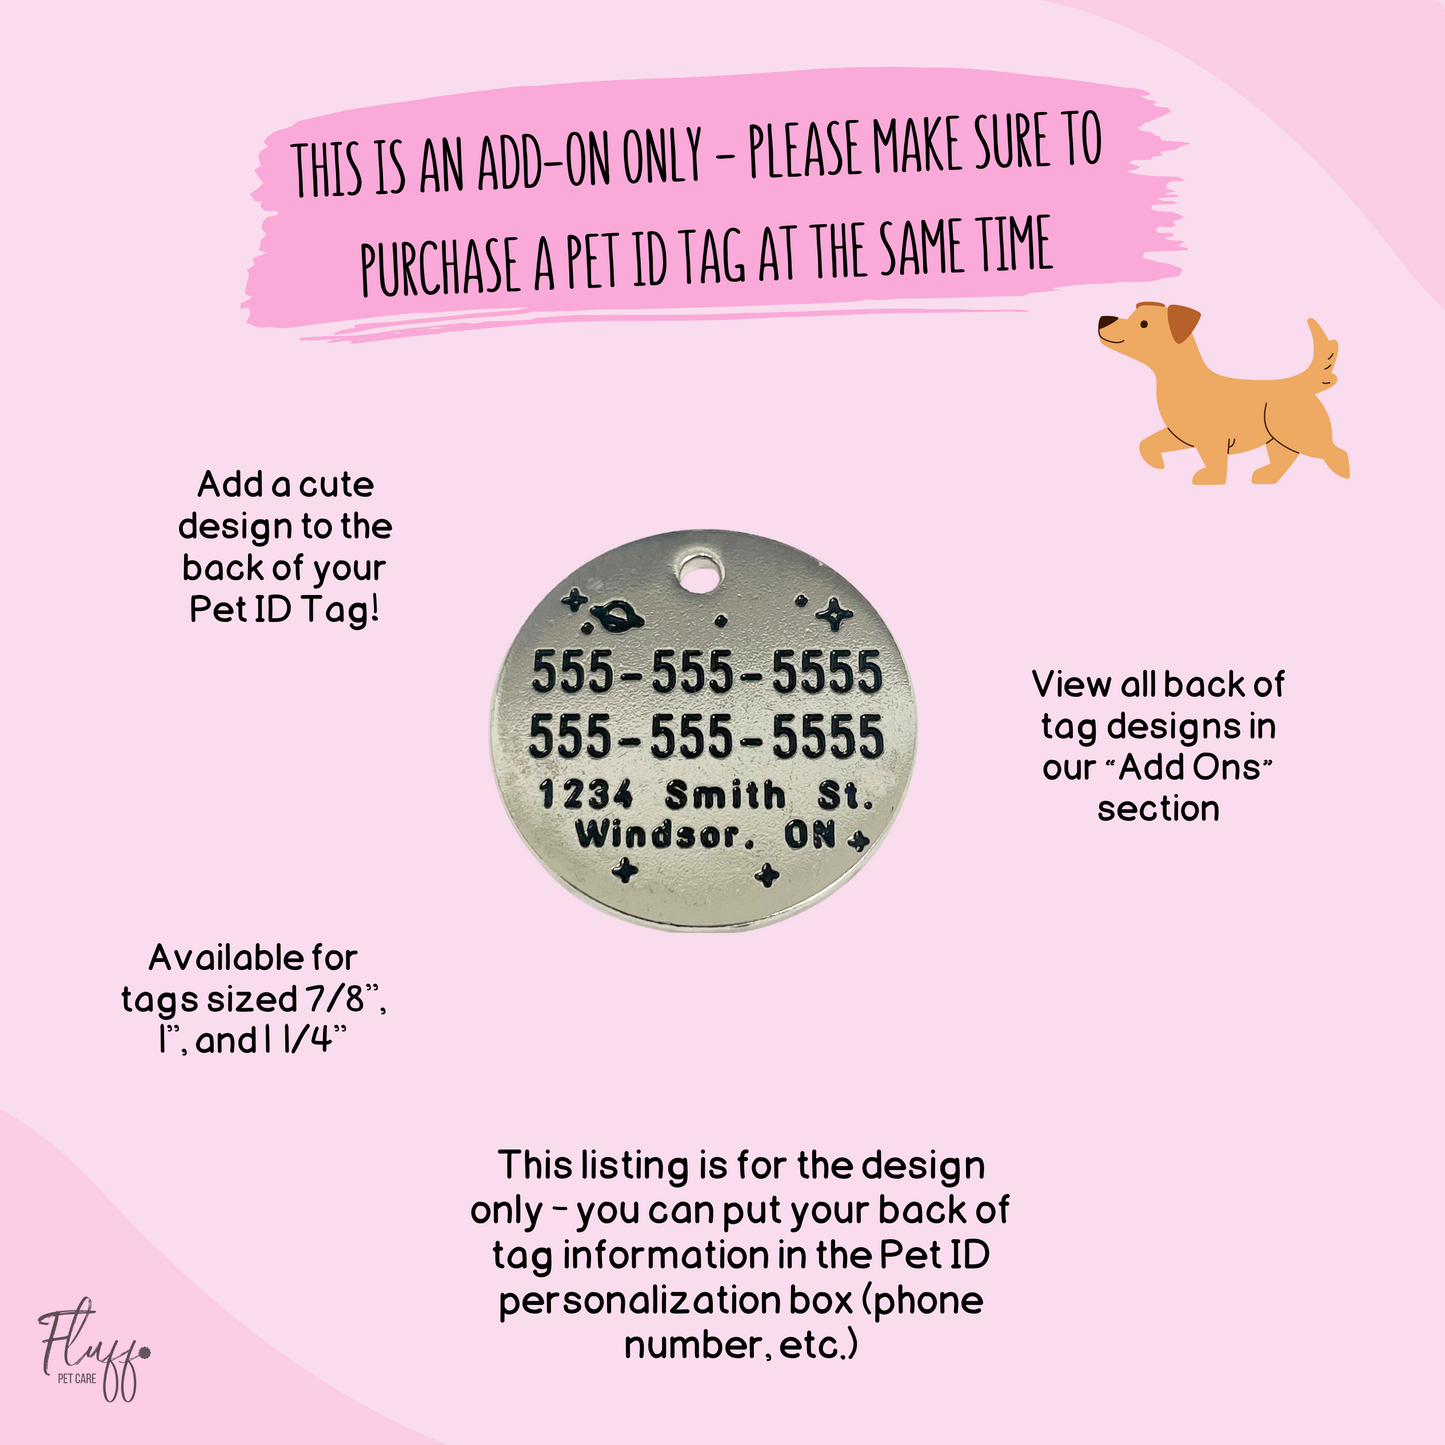 Space - Back of Pet ID Tag Design